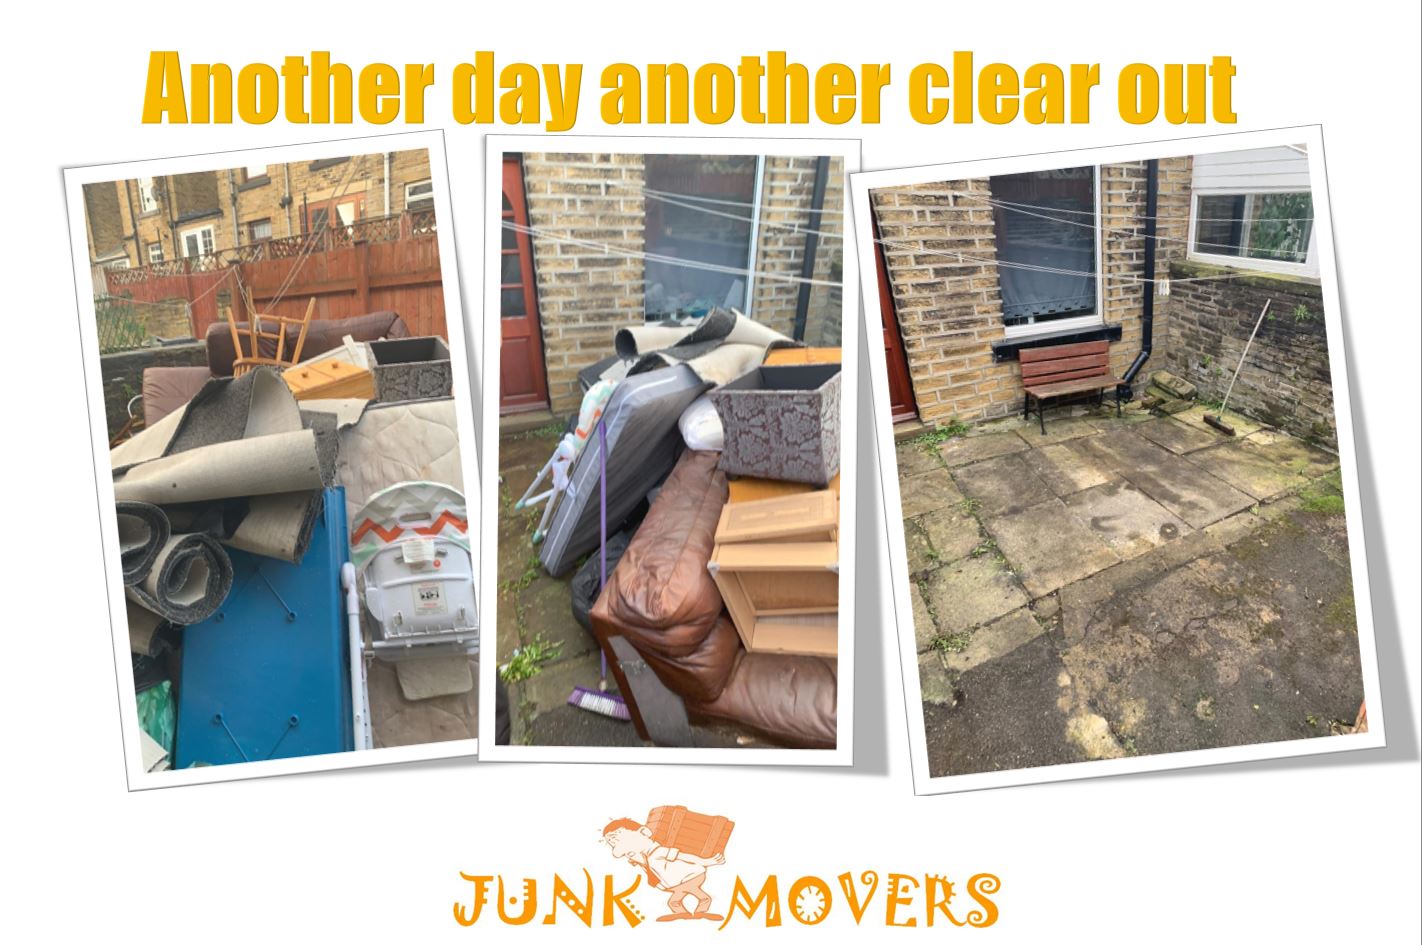 Junk Collection in Oldham, Junk Movers West Yorkshire Ltd